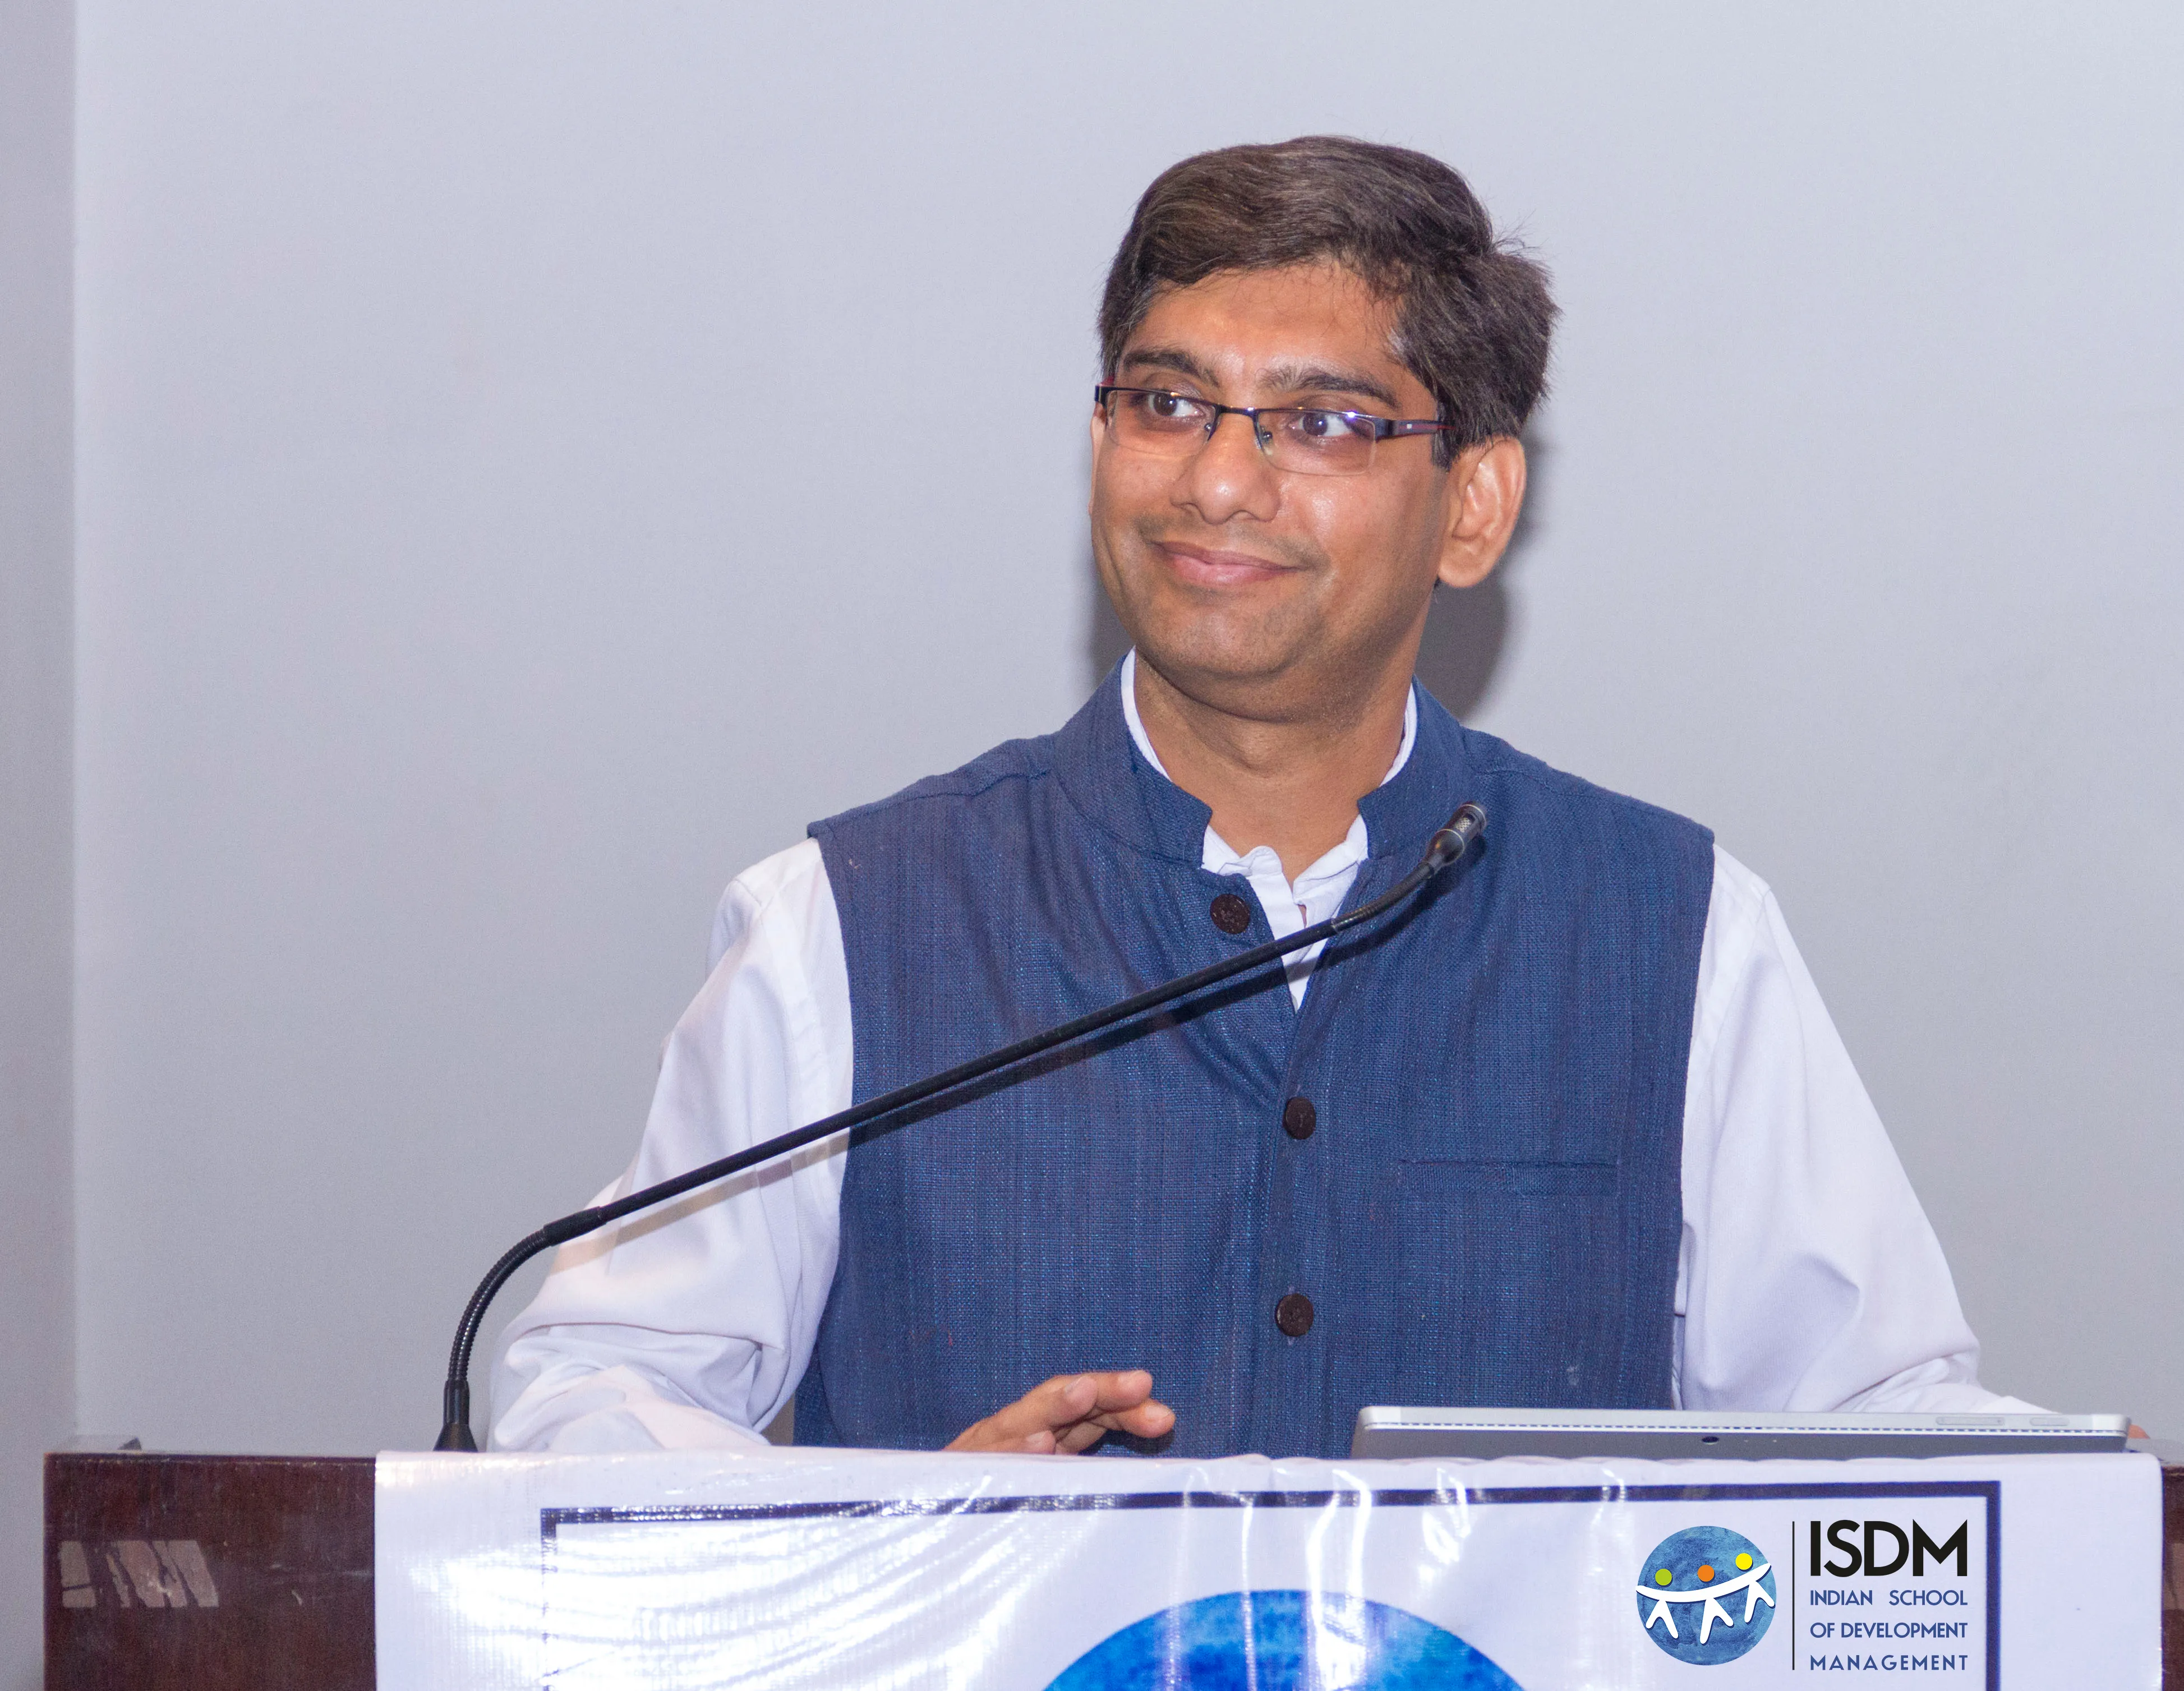 MY JOURNEY FROM THE IIMS TO THE DEVELOPMENT SECTOR